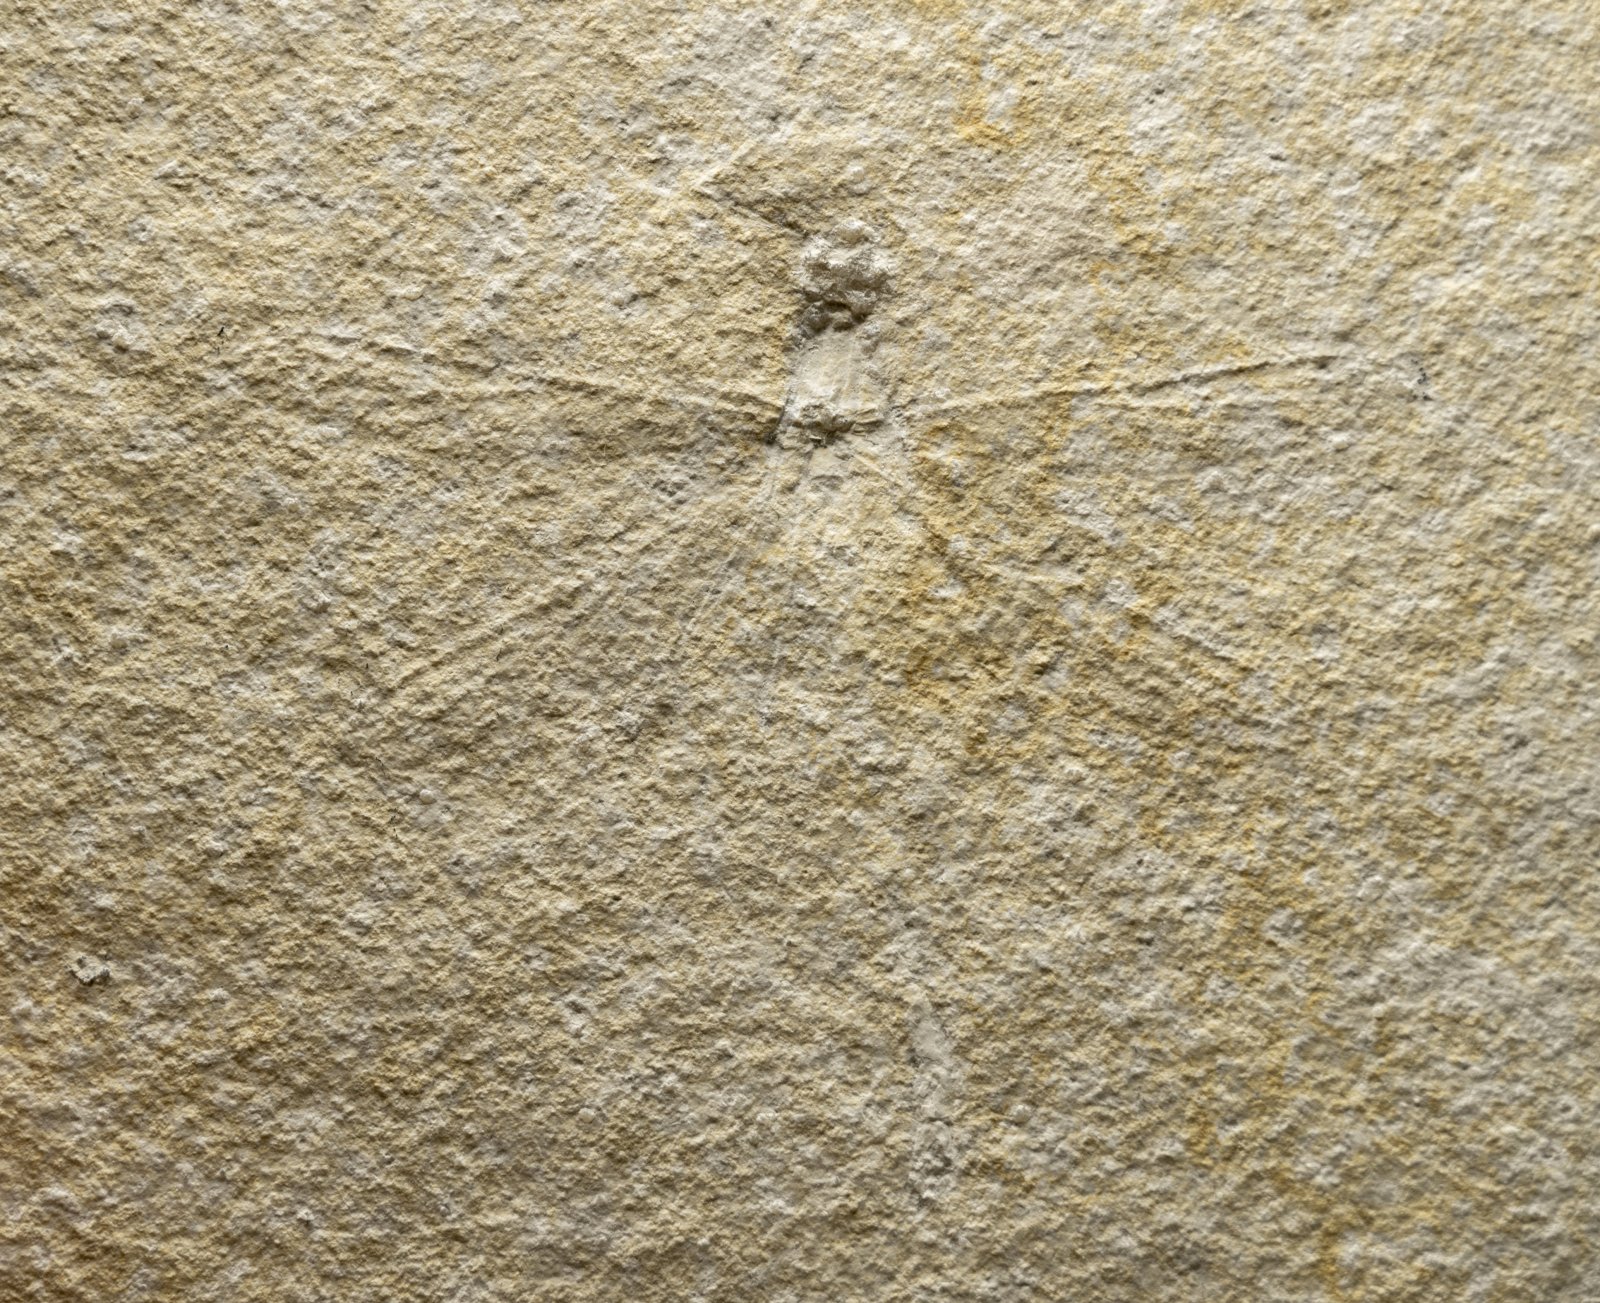 Fossils from the Plattenkalke of the Altmühl Valley